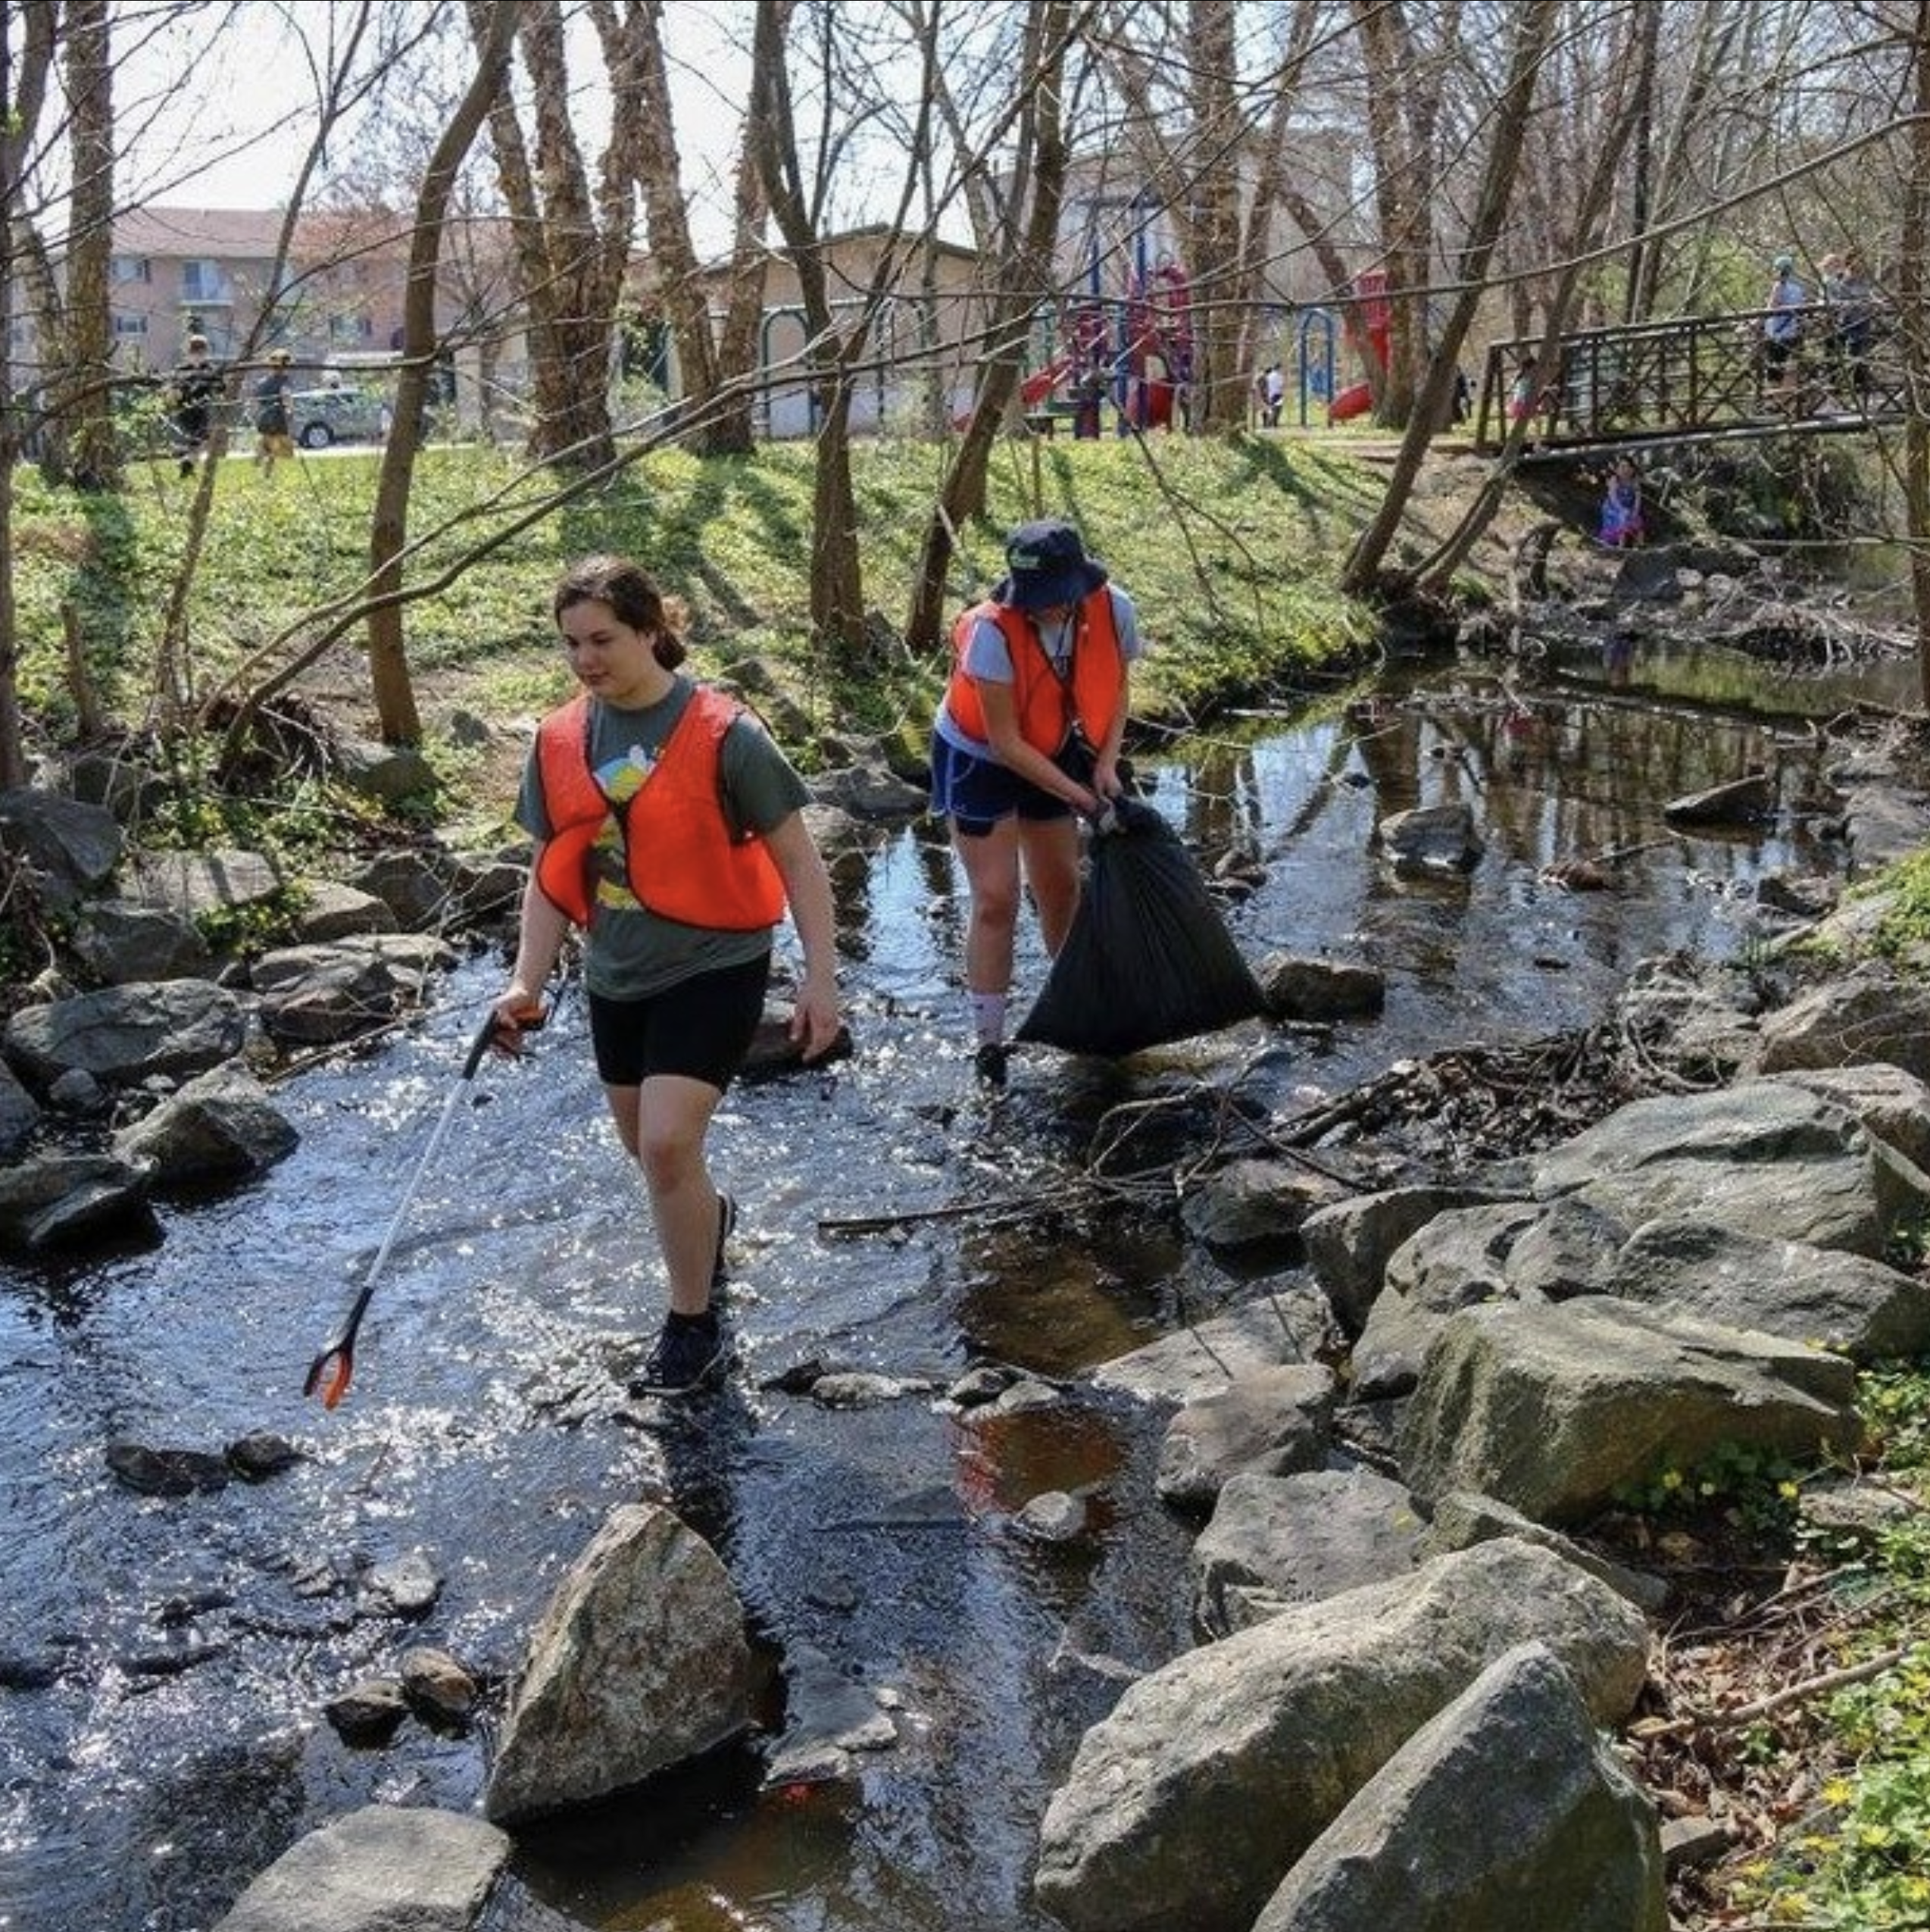 Volunteers Needed! Let’s Clean Up Upper Merion Township’s Streams & Streets, and the Schuylkill River! 